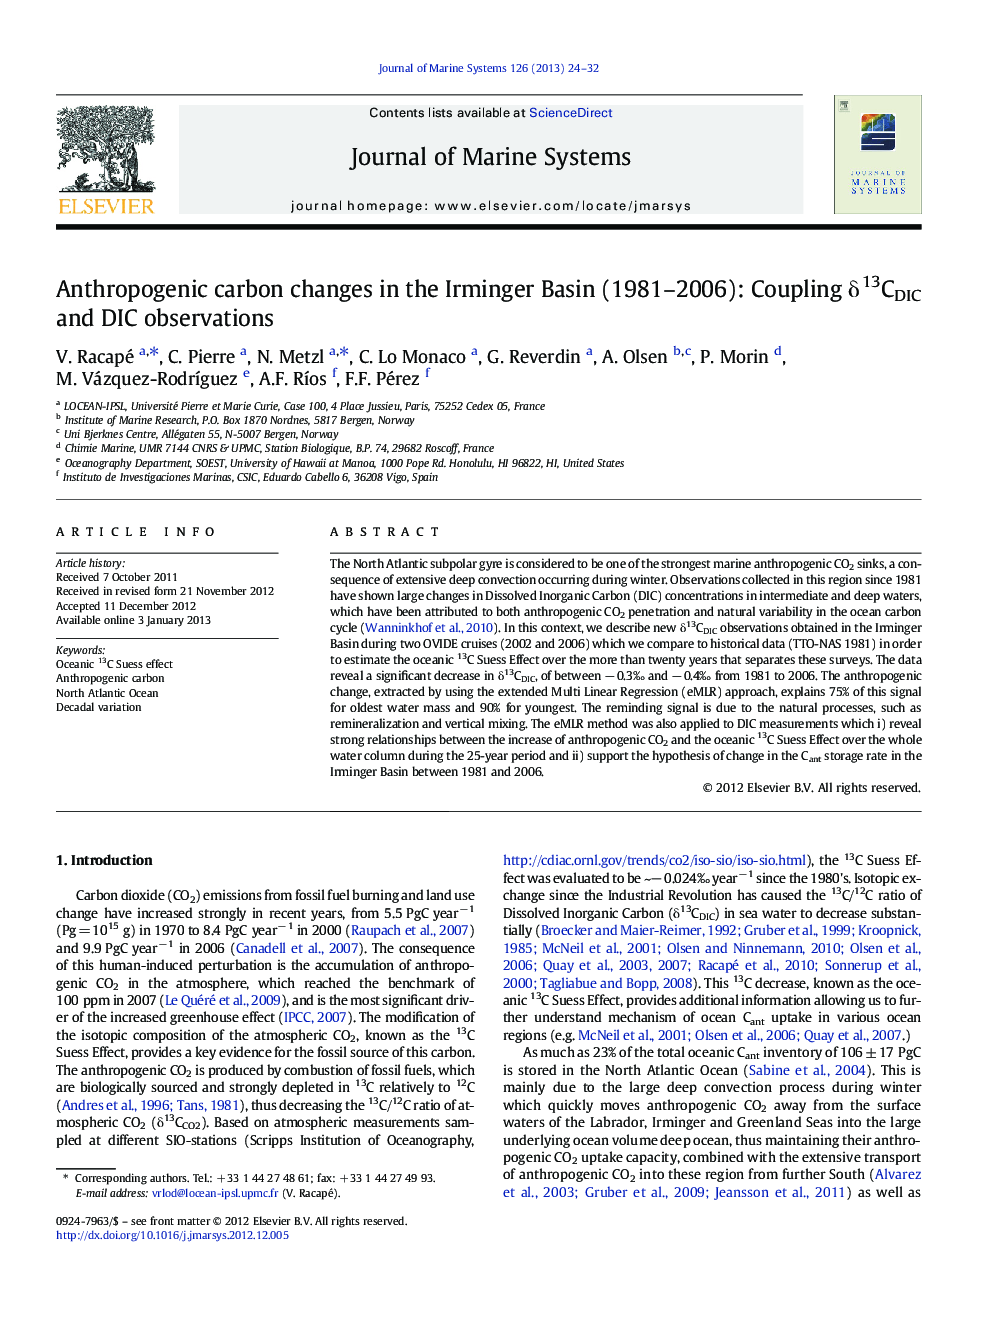 Anthropogenic carbon changes in the Irminger Basin (1981-2006): Coupling Î´13CDIC and DIC observations